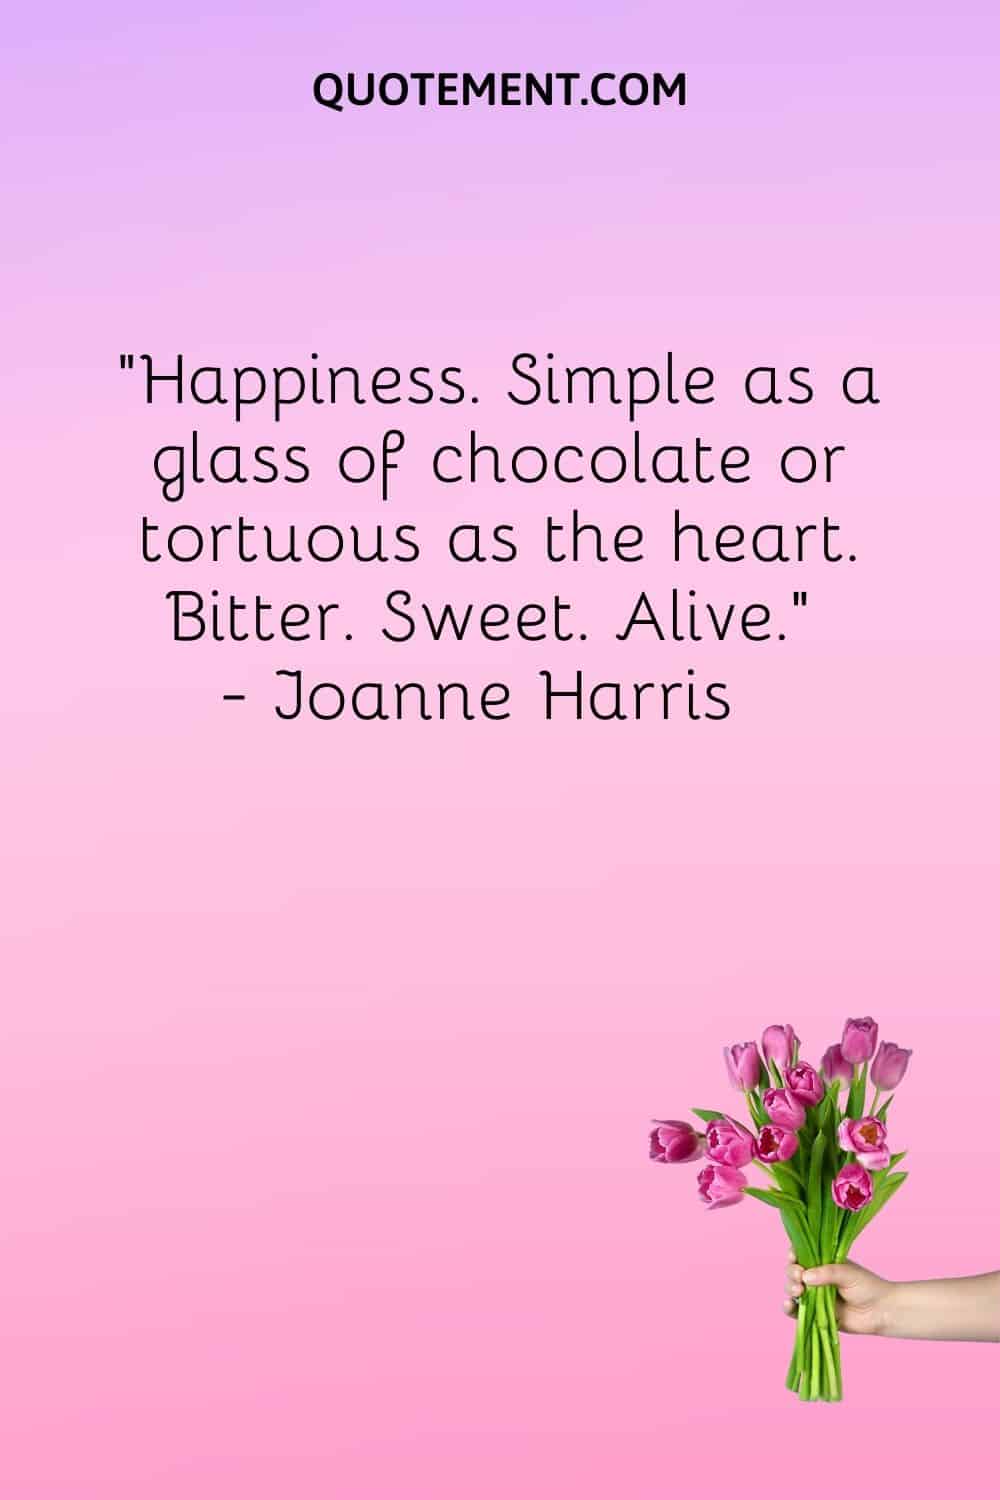 Happiness. Simple as a glass of chocolate or tortuous as the heart